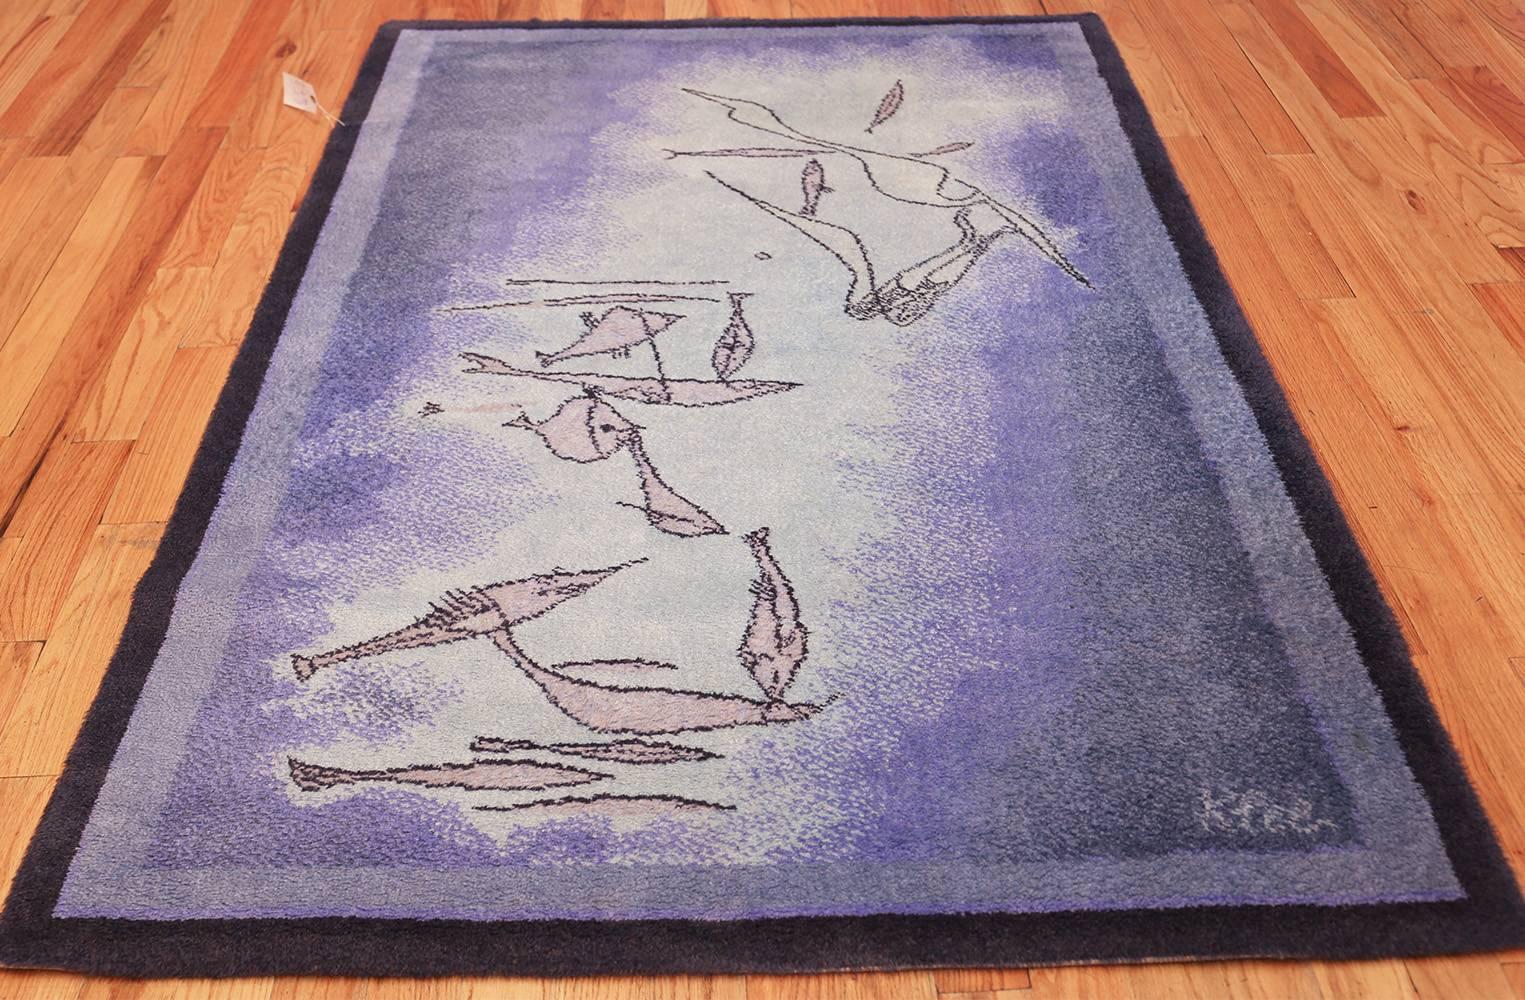 20th Century Vintage Scandinavian Fish Rug by Ege after Klee. Size: 4 ft 7 in x 6 ft 7 in 